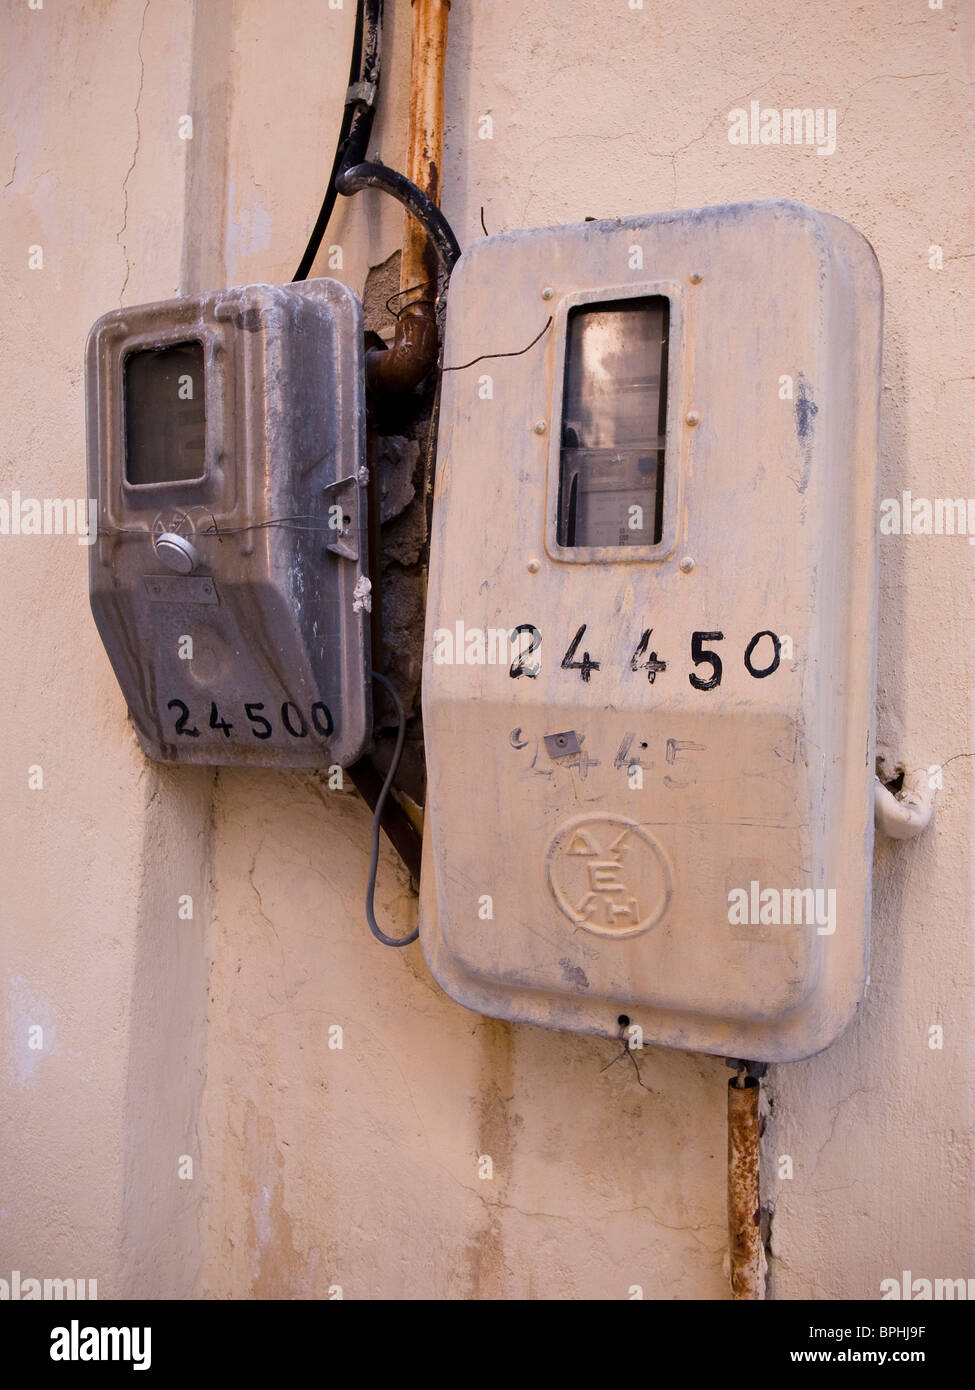 Electricity meter on wall in Greece Stock Photo